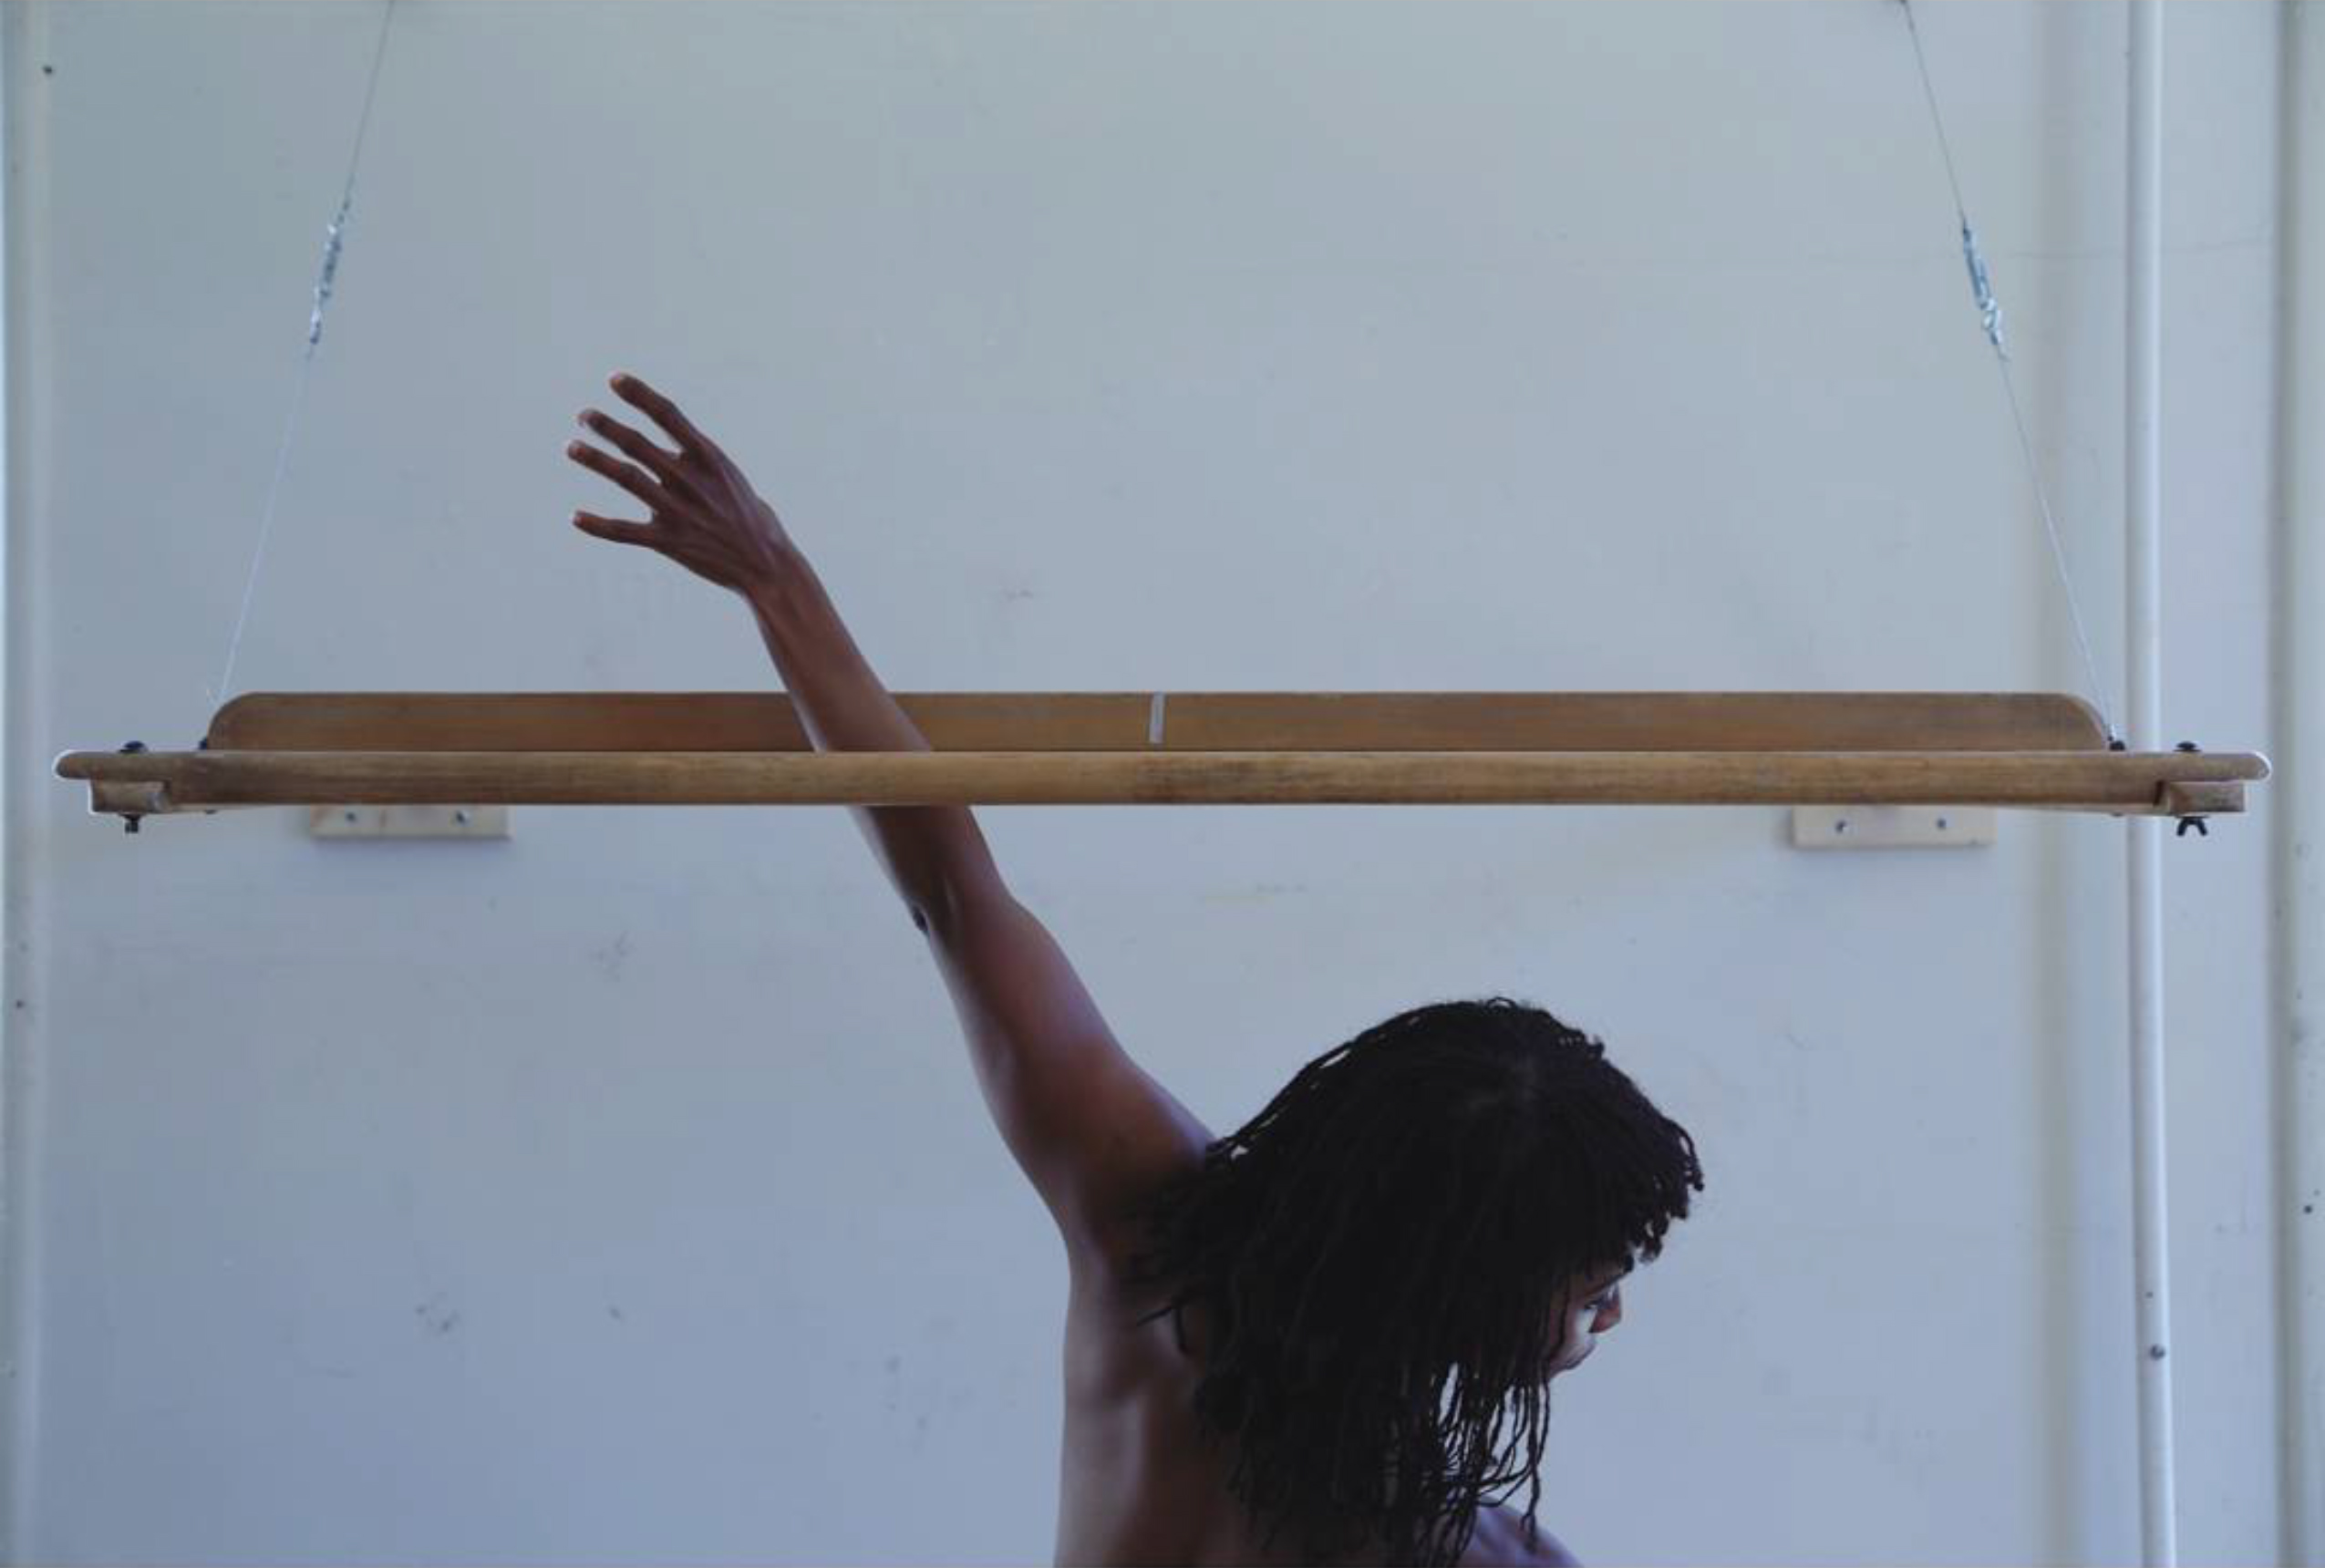 An image from Indira Allegra's 'Body Warp' series, produced while in residence at Headlands Center for the Arts.